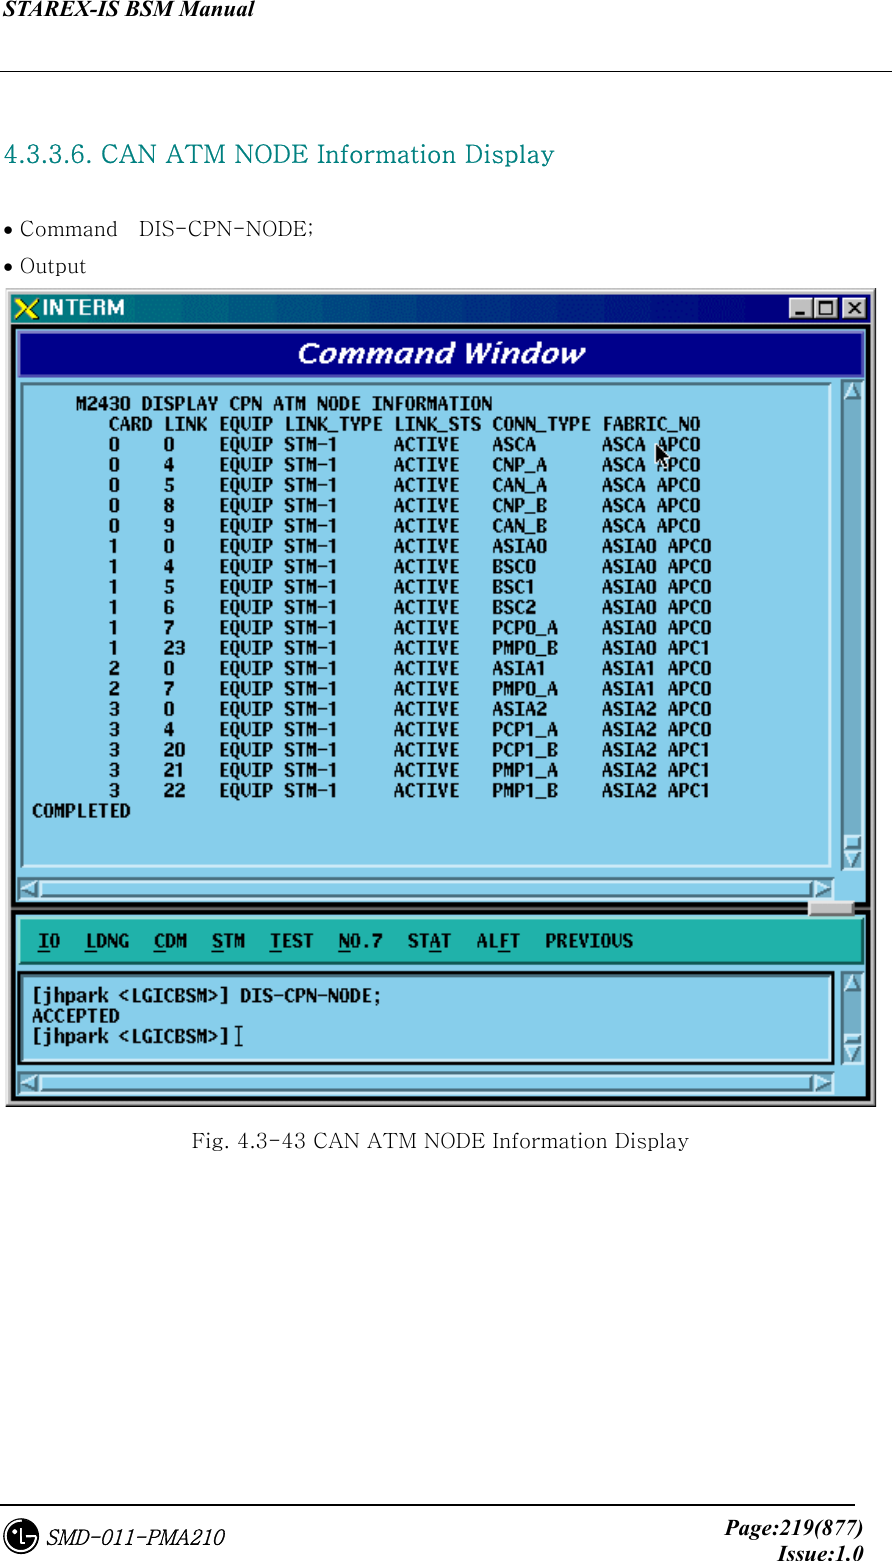 STAREX-IS BSM Manual     Page:219(877)Issue:1.0SMD-011-PMA210  4.3.3.6. CAN ATM NODE Information Display  • Command    DIS-CPN-NODE; • Output  Fig. 4.3-43 CAN ATM NODE Information Display 